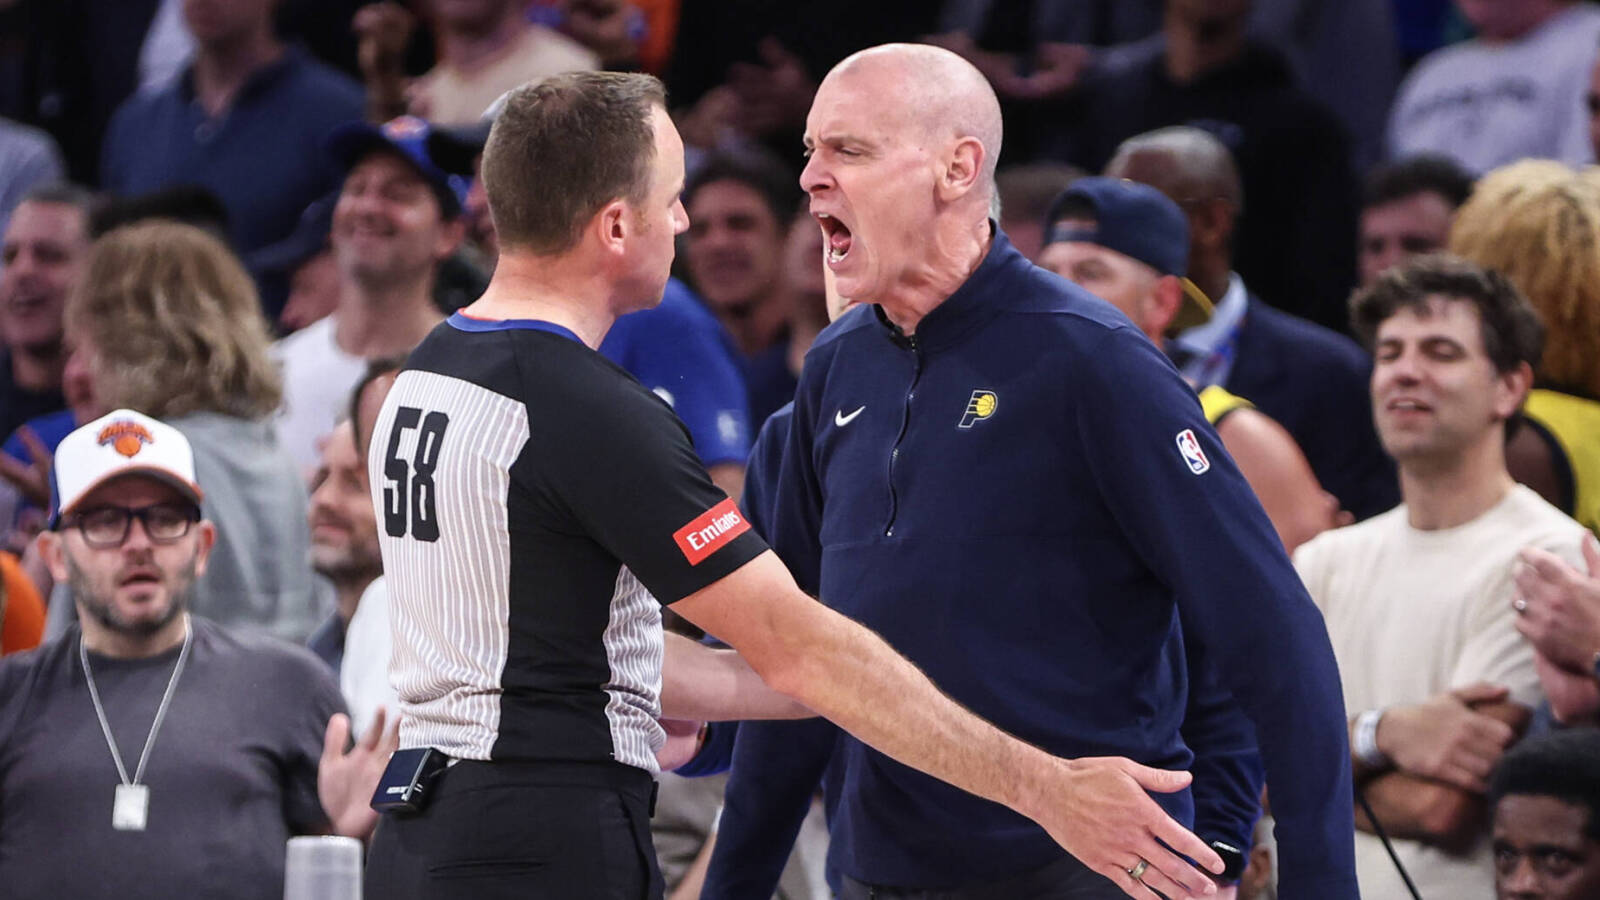 Pacers coach claims officials are biased against 'small market' teams